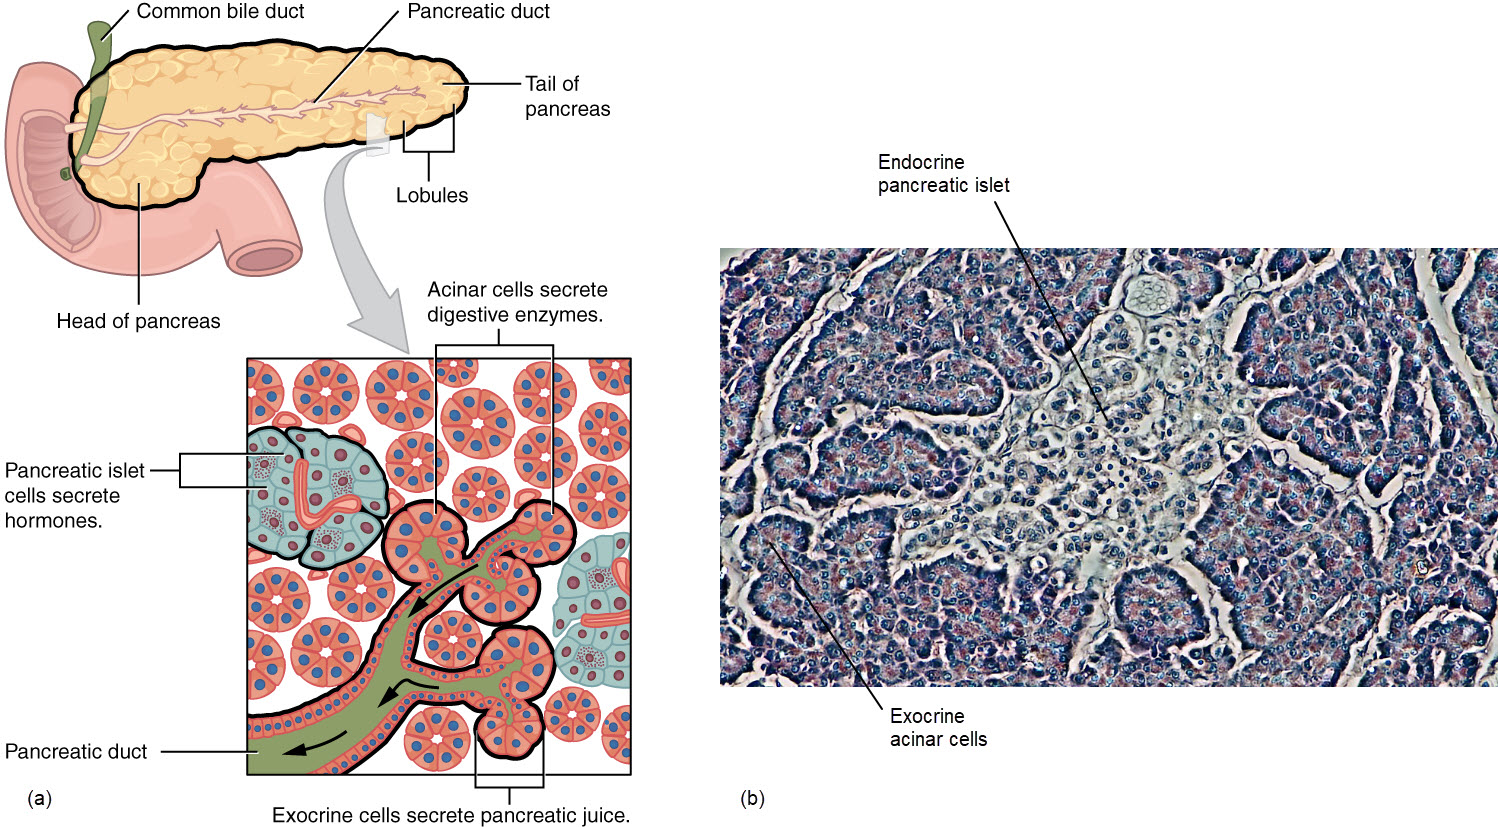 Diagram of pancreas alongside a micrograph showing the exocrine acinar cells connected to branches of the pancreatic duct and endocrine pancreatic islets.